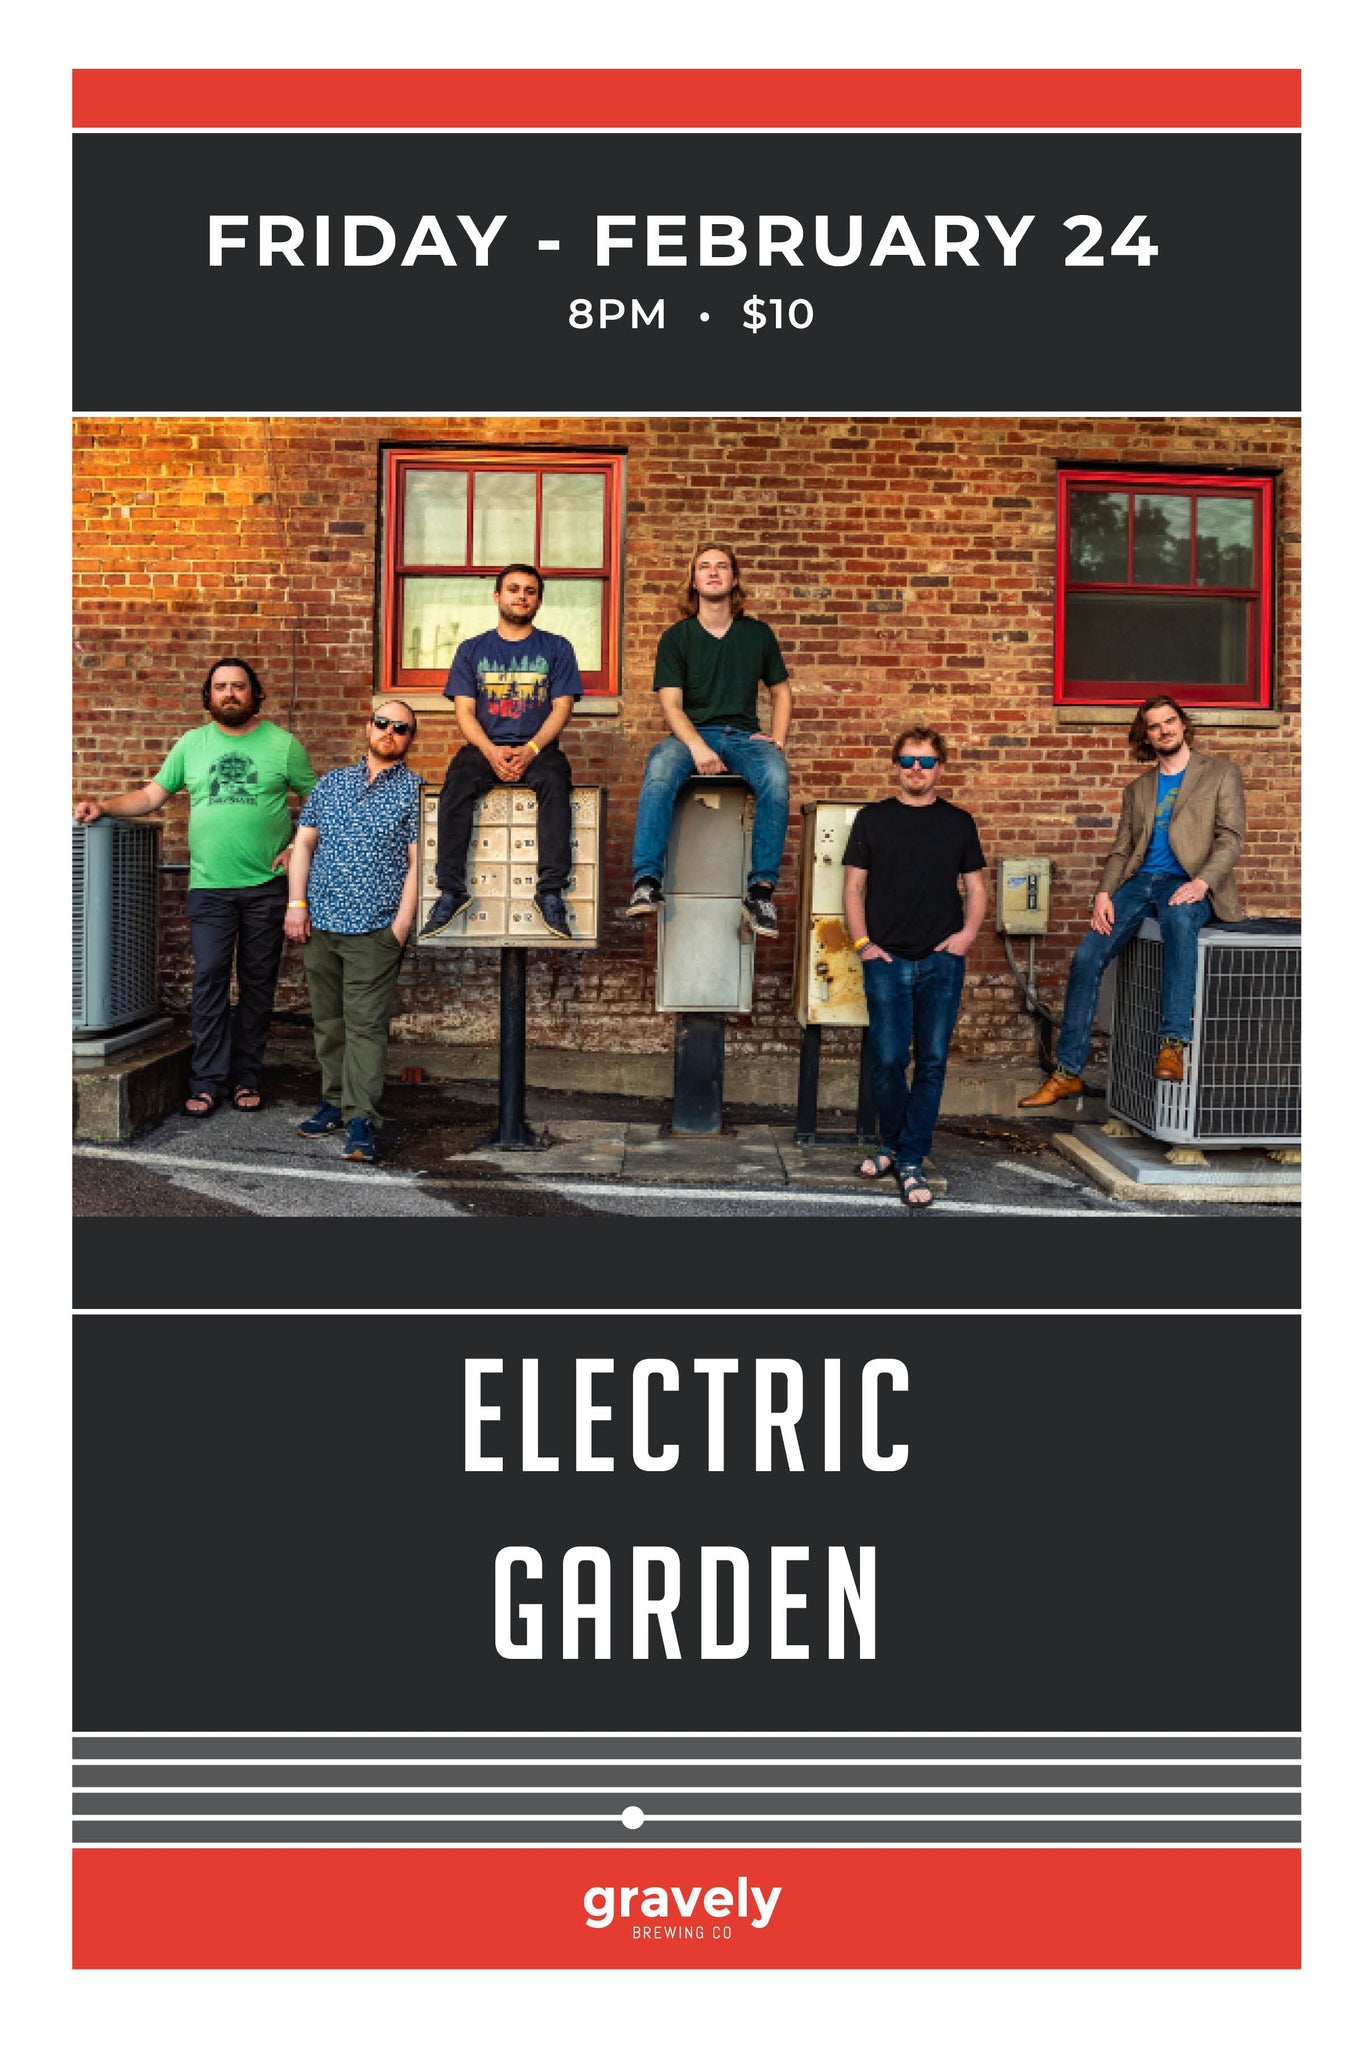 Electric Garden with Mr. Please